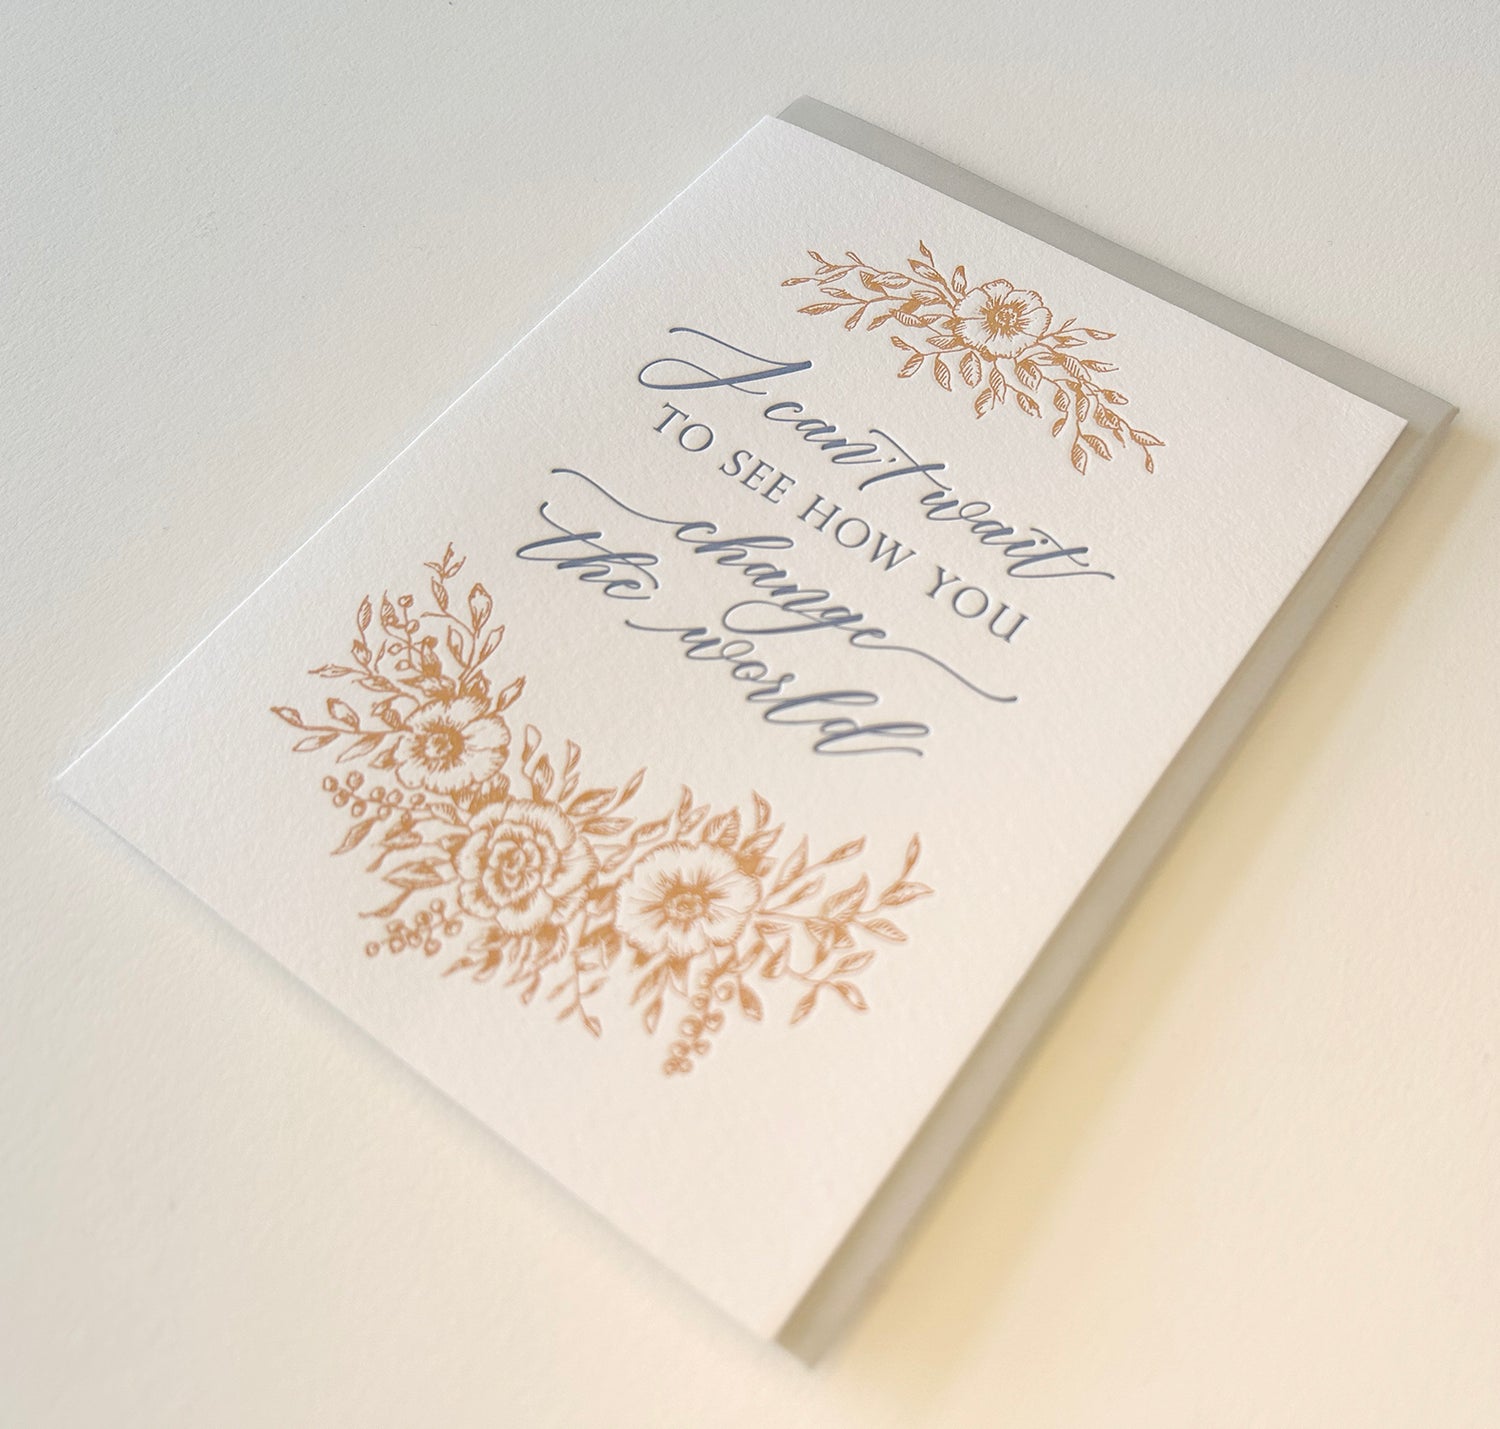 Letterpress congratulations card with florals that says " I Can't Wait To See How You Change The World" by Rust Belt Love